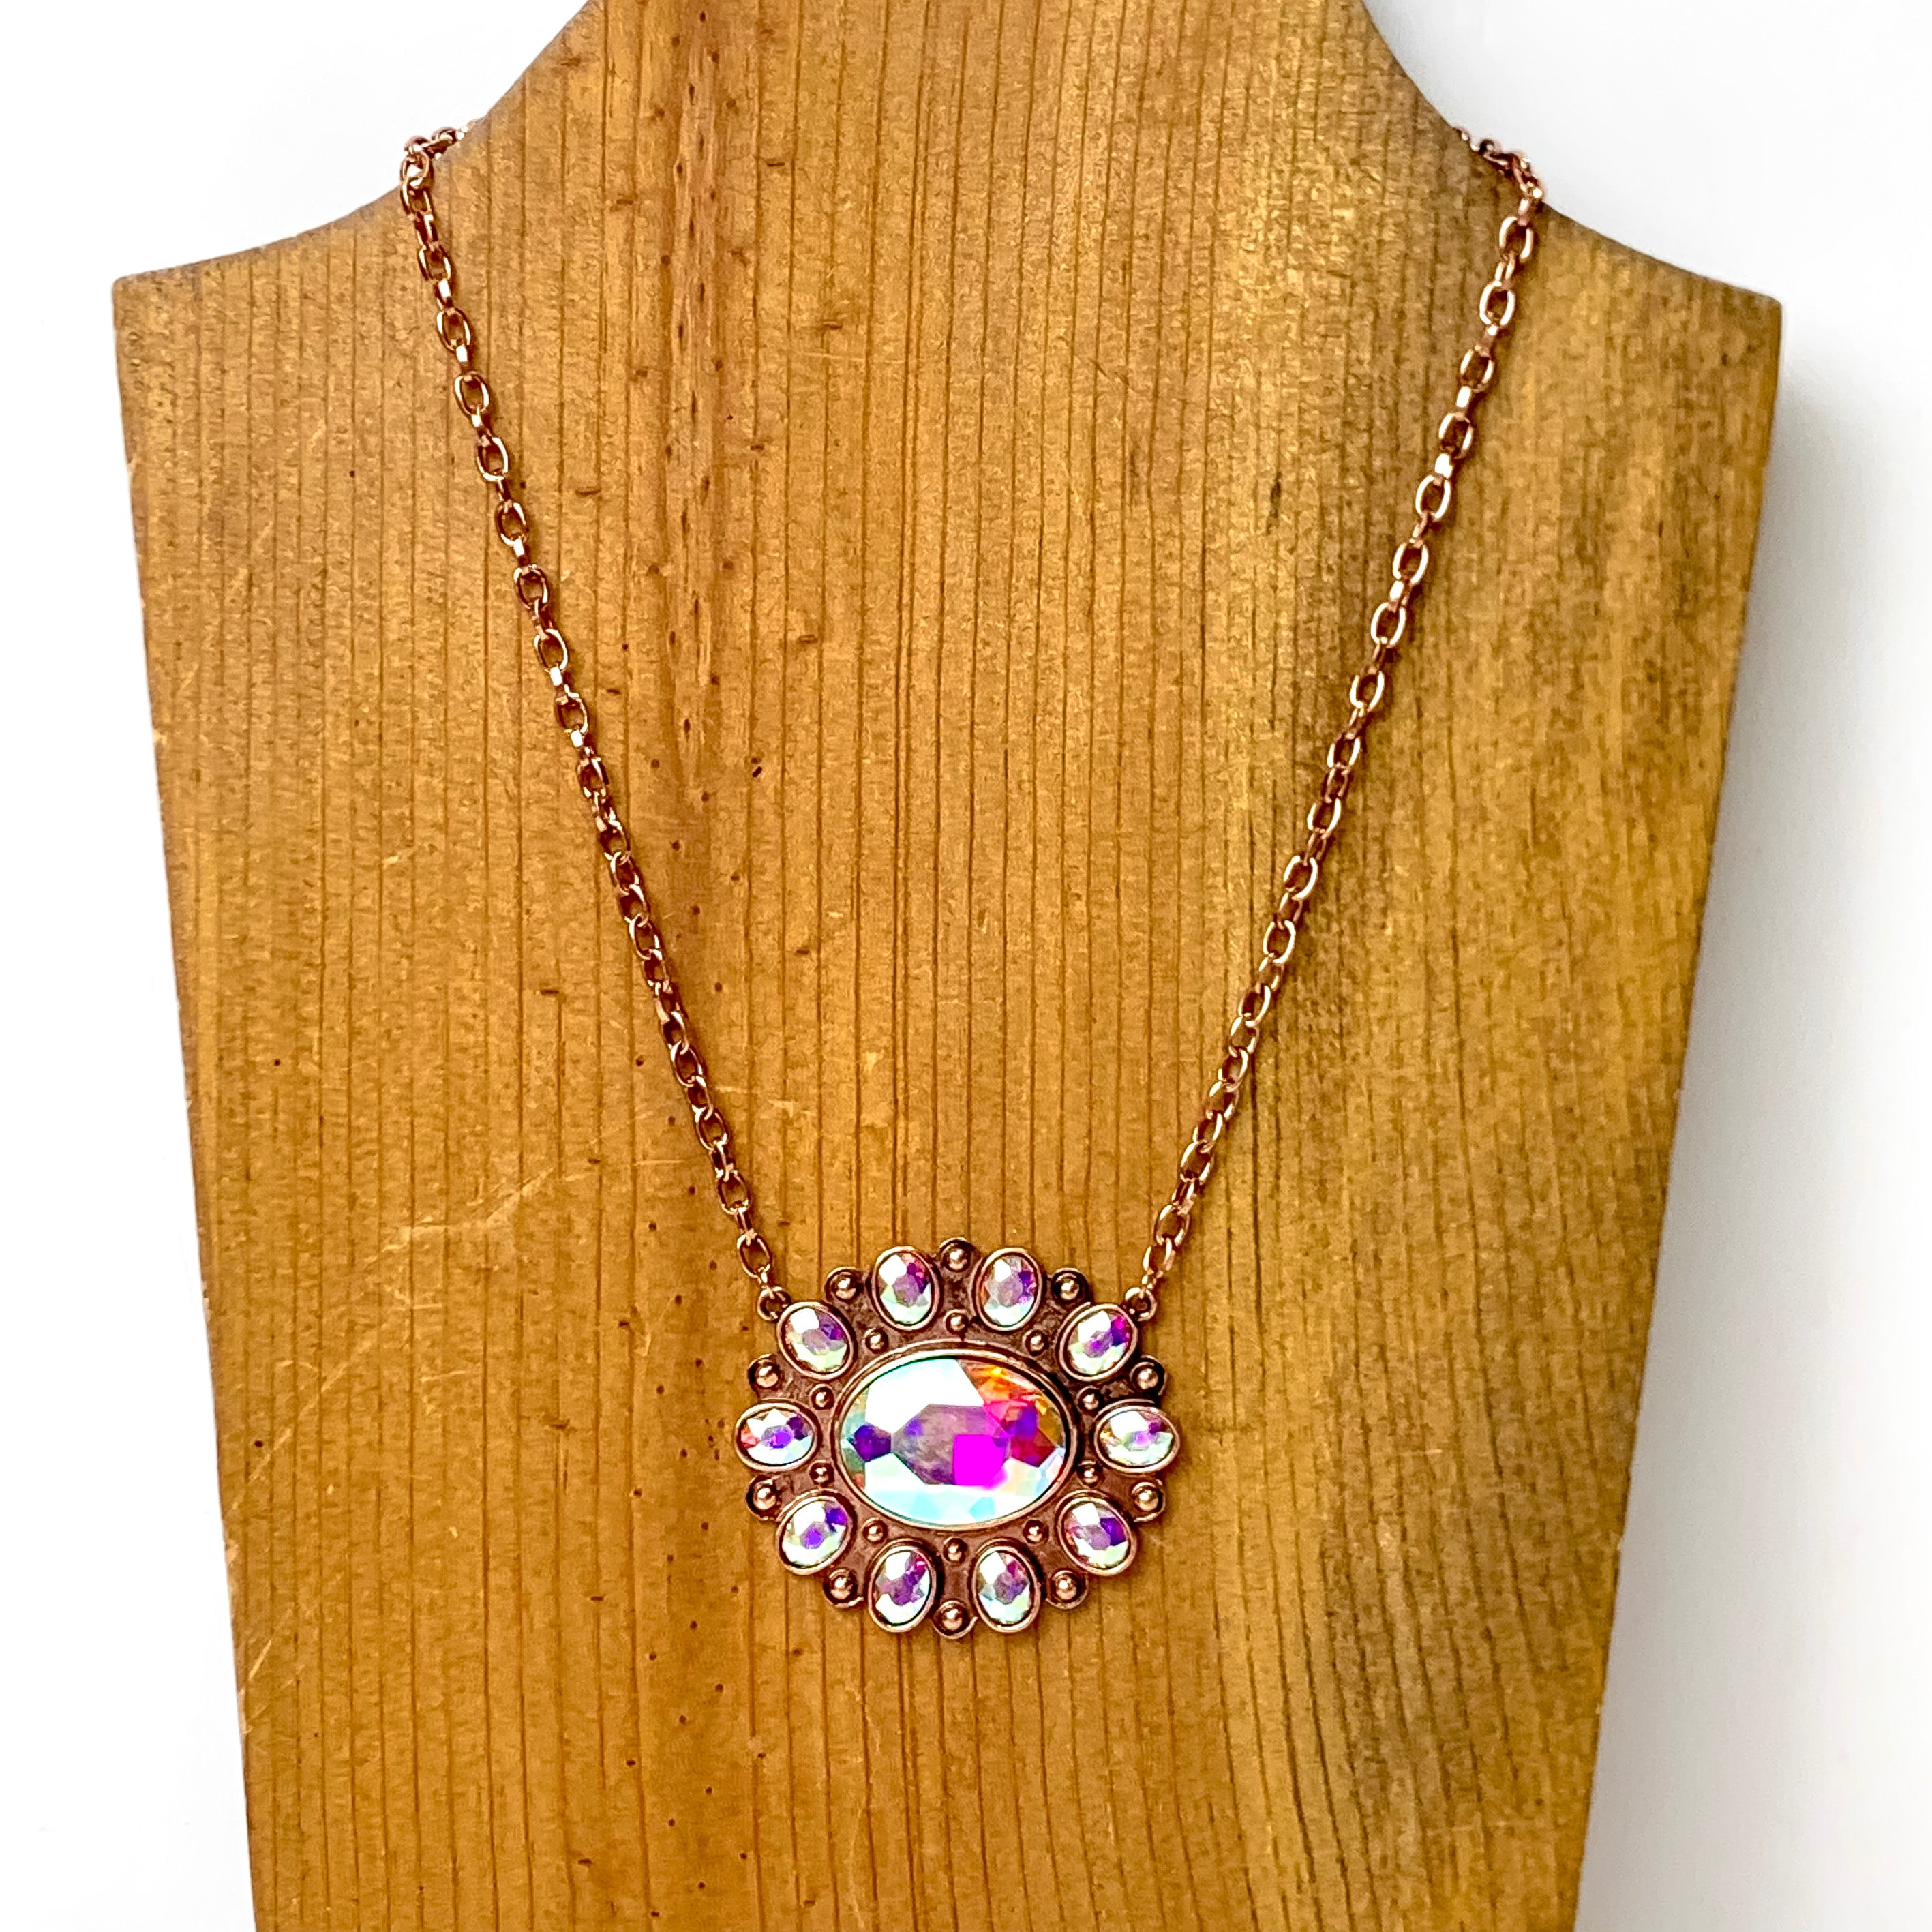 Desert Diva Concho Necklace in Copper Tone - Giddy Up Glamour Boutique